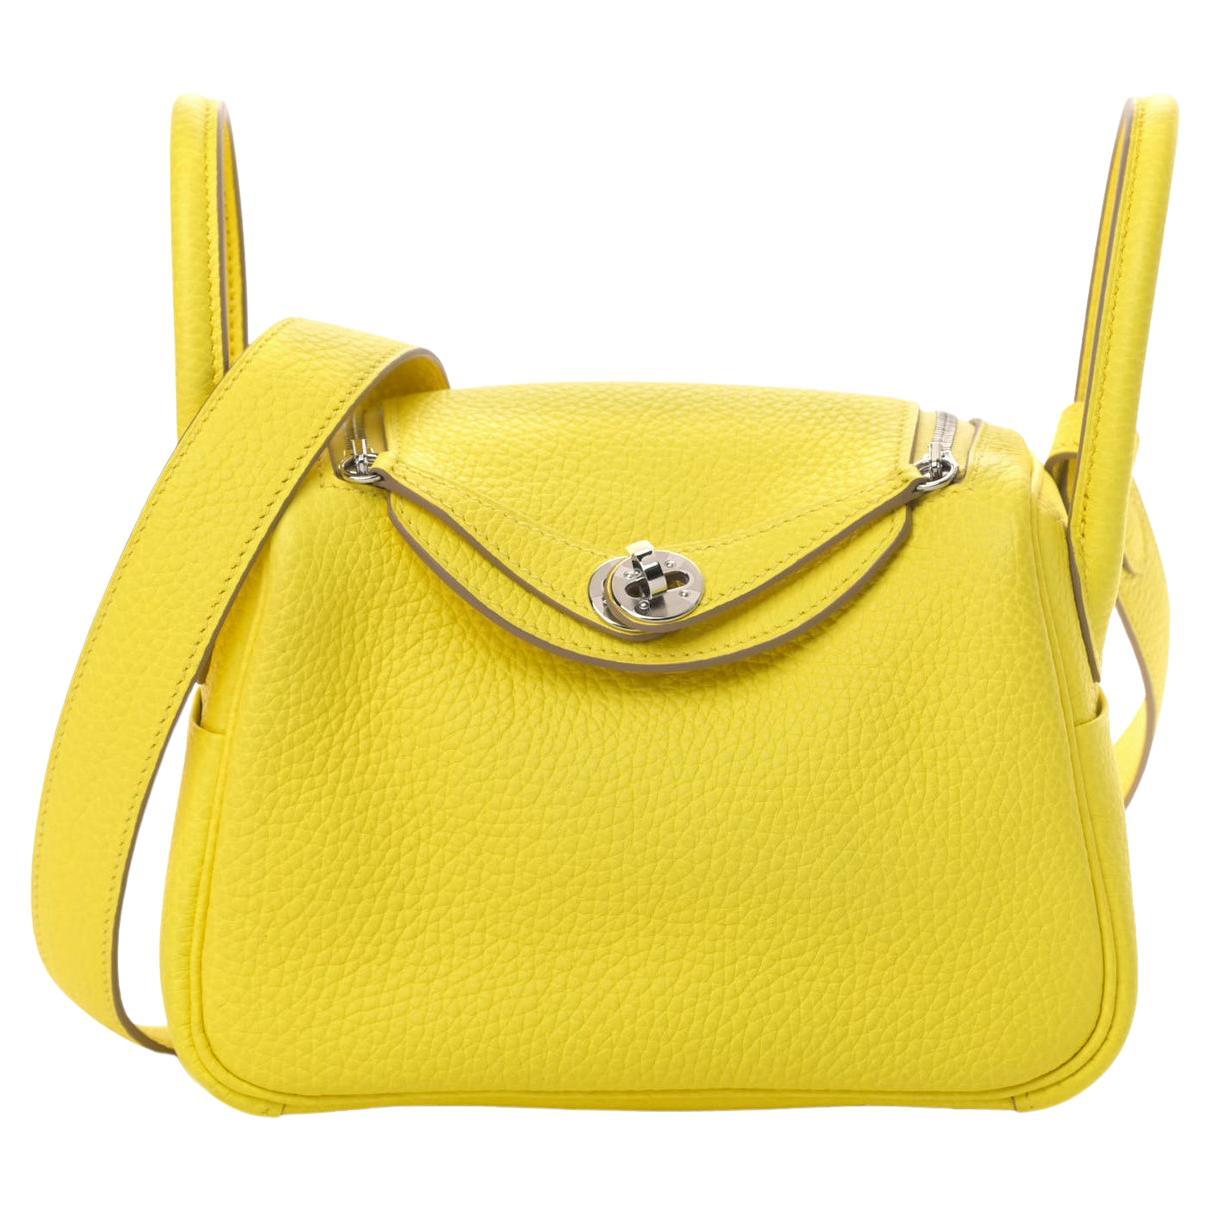 HERMES NEW Mini Lindy 20 Bright Yellow Lime Leather Palladium Top Handle Bag